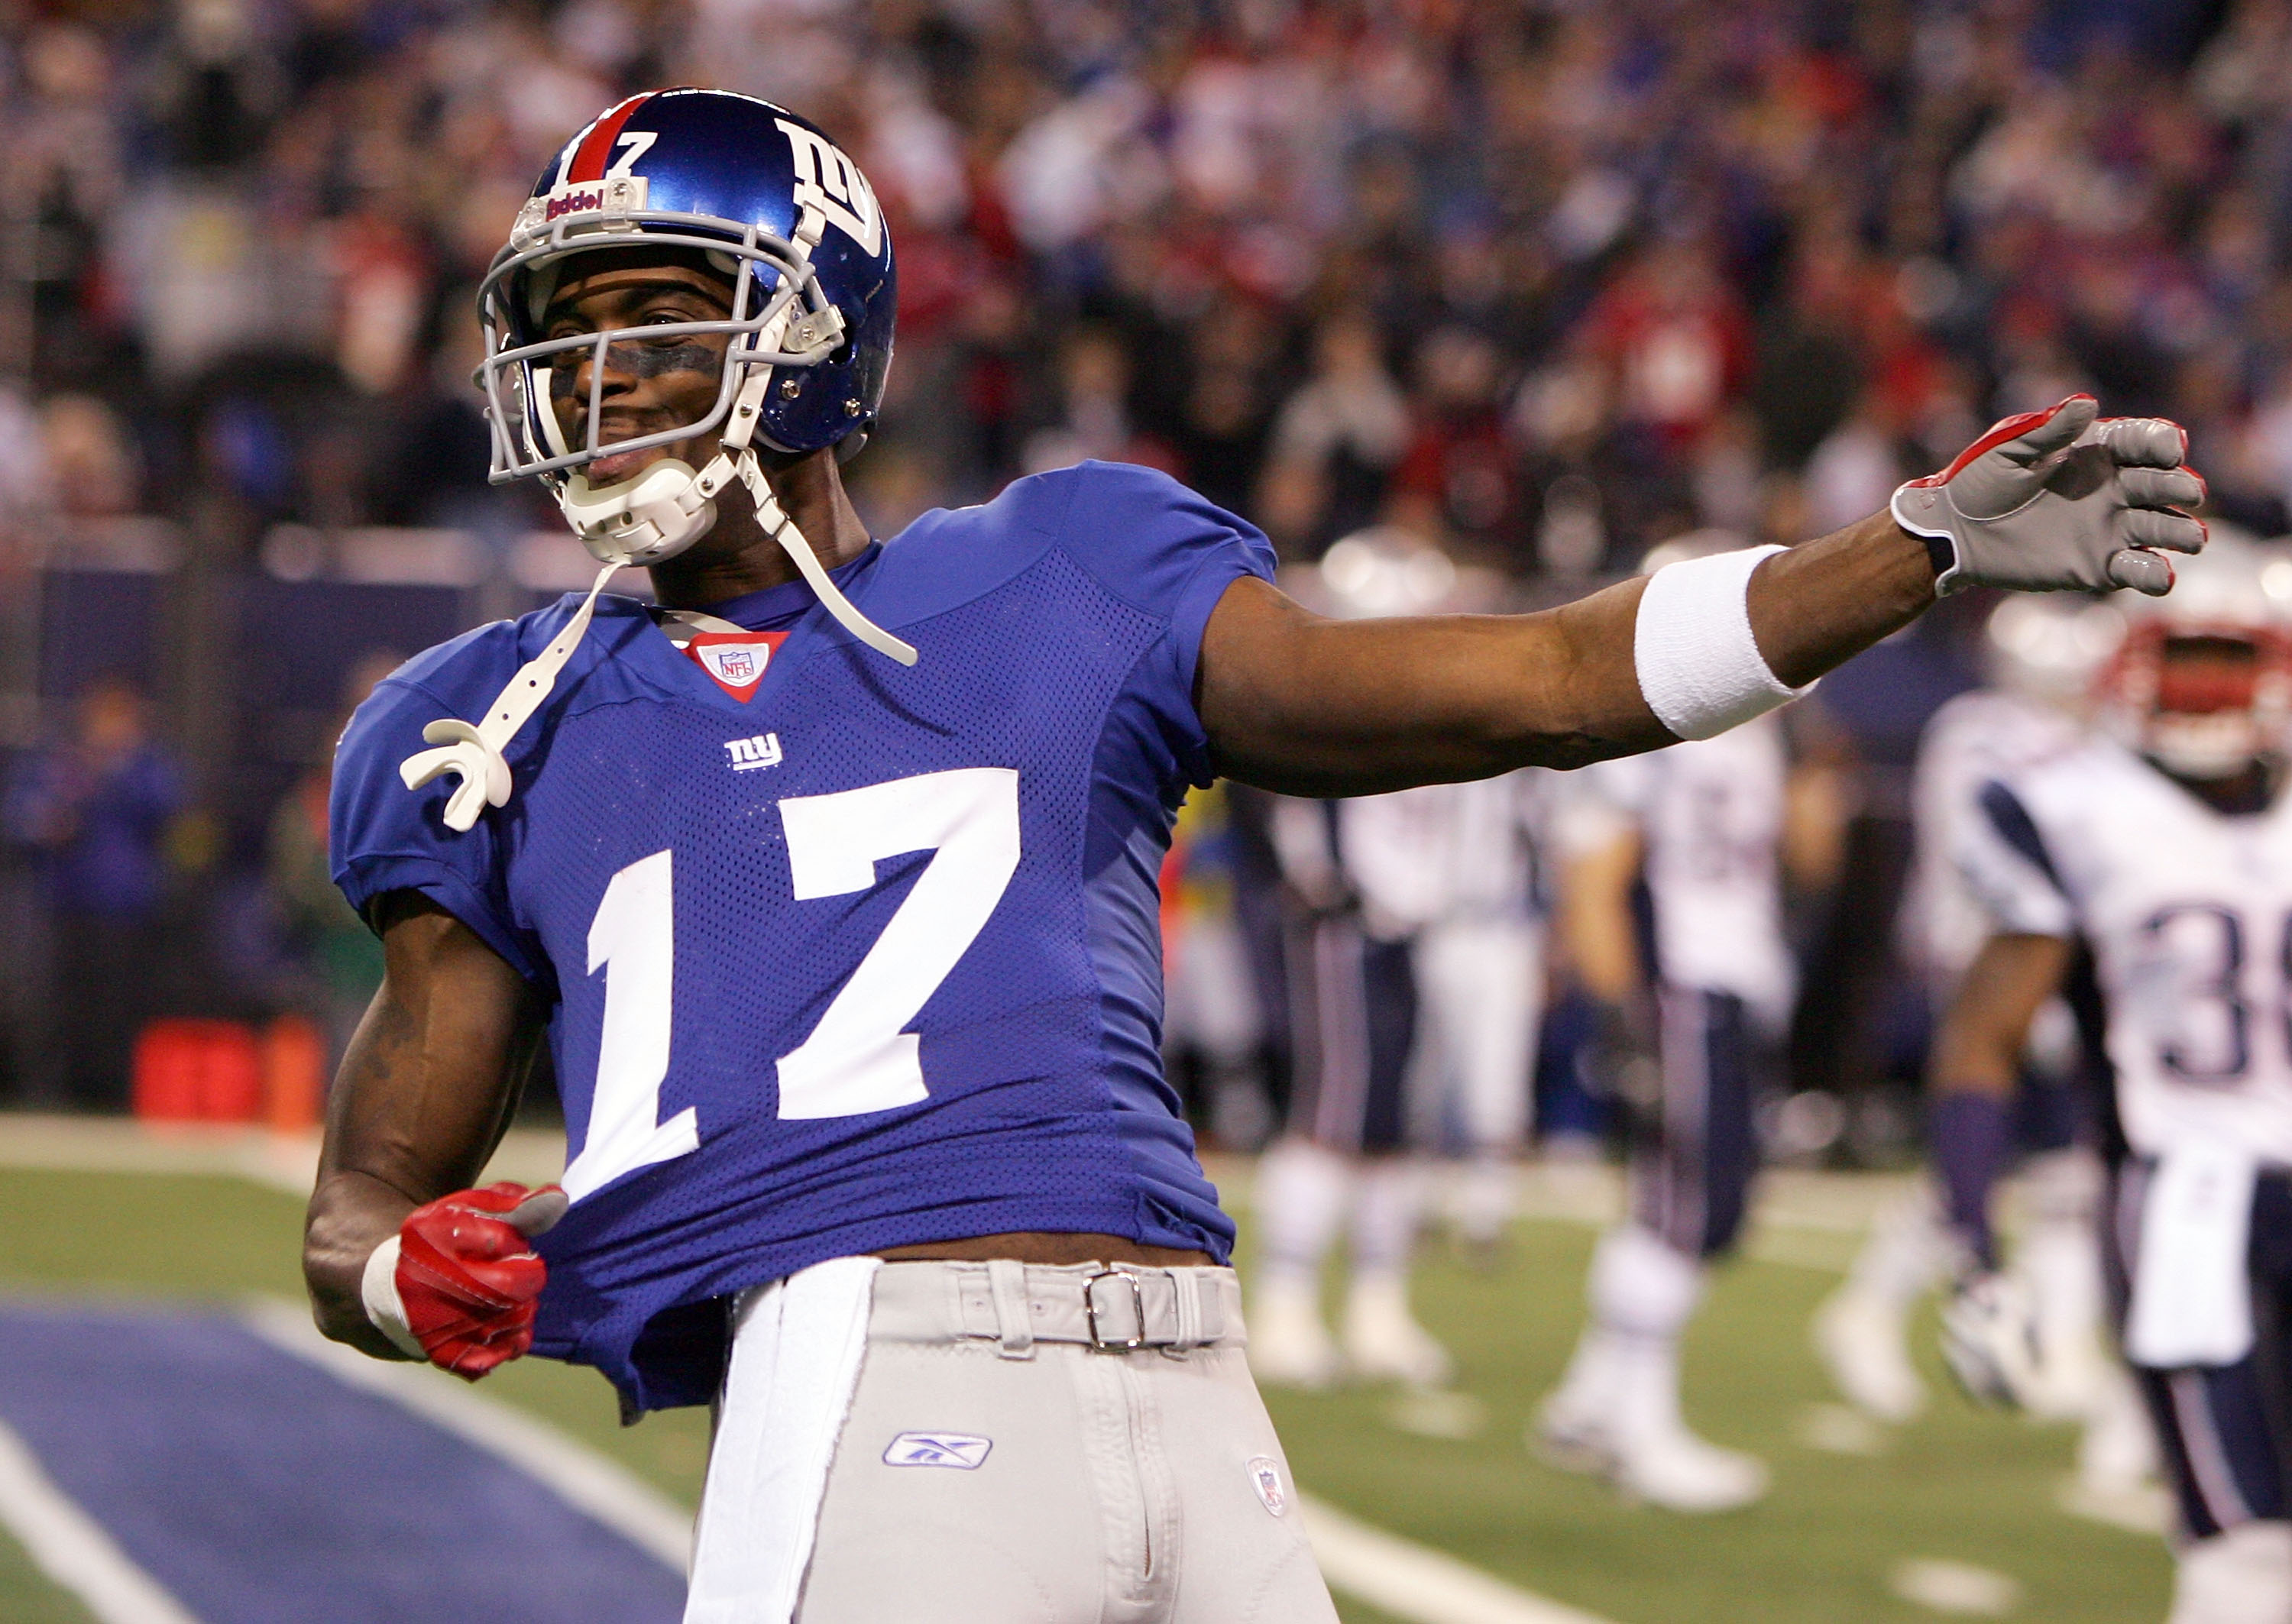 EAST RUTHERFORD, NJ - DECEMBER 29:  Plaxico Burress #17 of the New York Giants calls for pass interference after a play in the endzone against the New England Patriots on December 29, 2007 at Giants Stadium in East Rutherford, New Jersey.  (Photo by Jim M